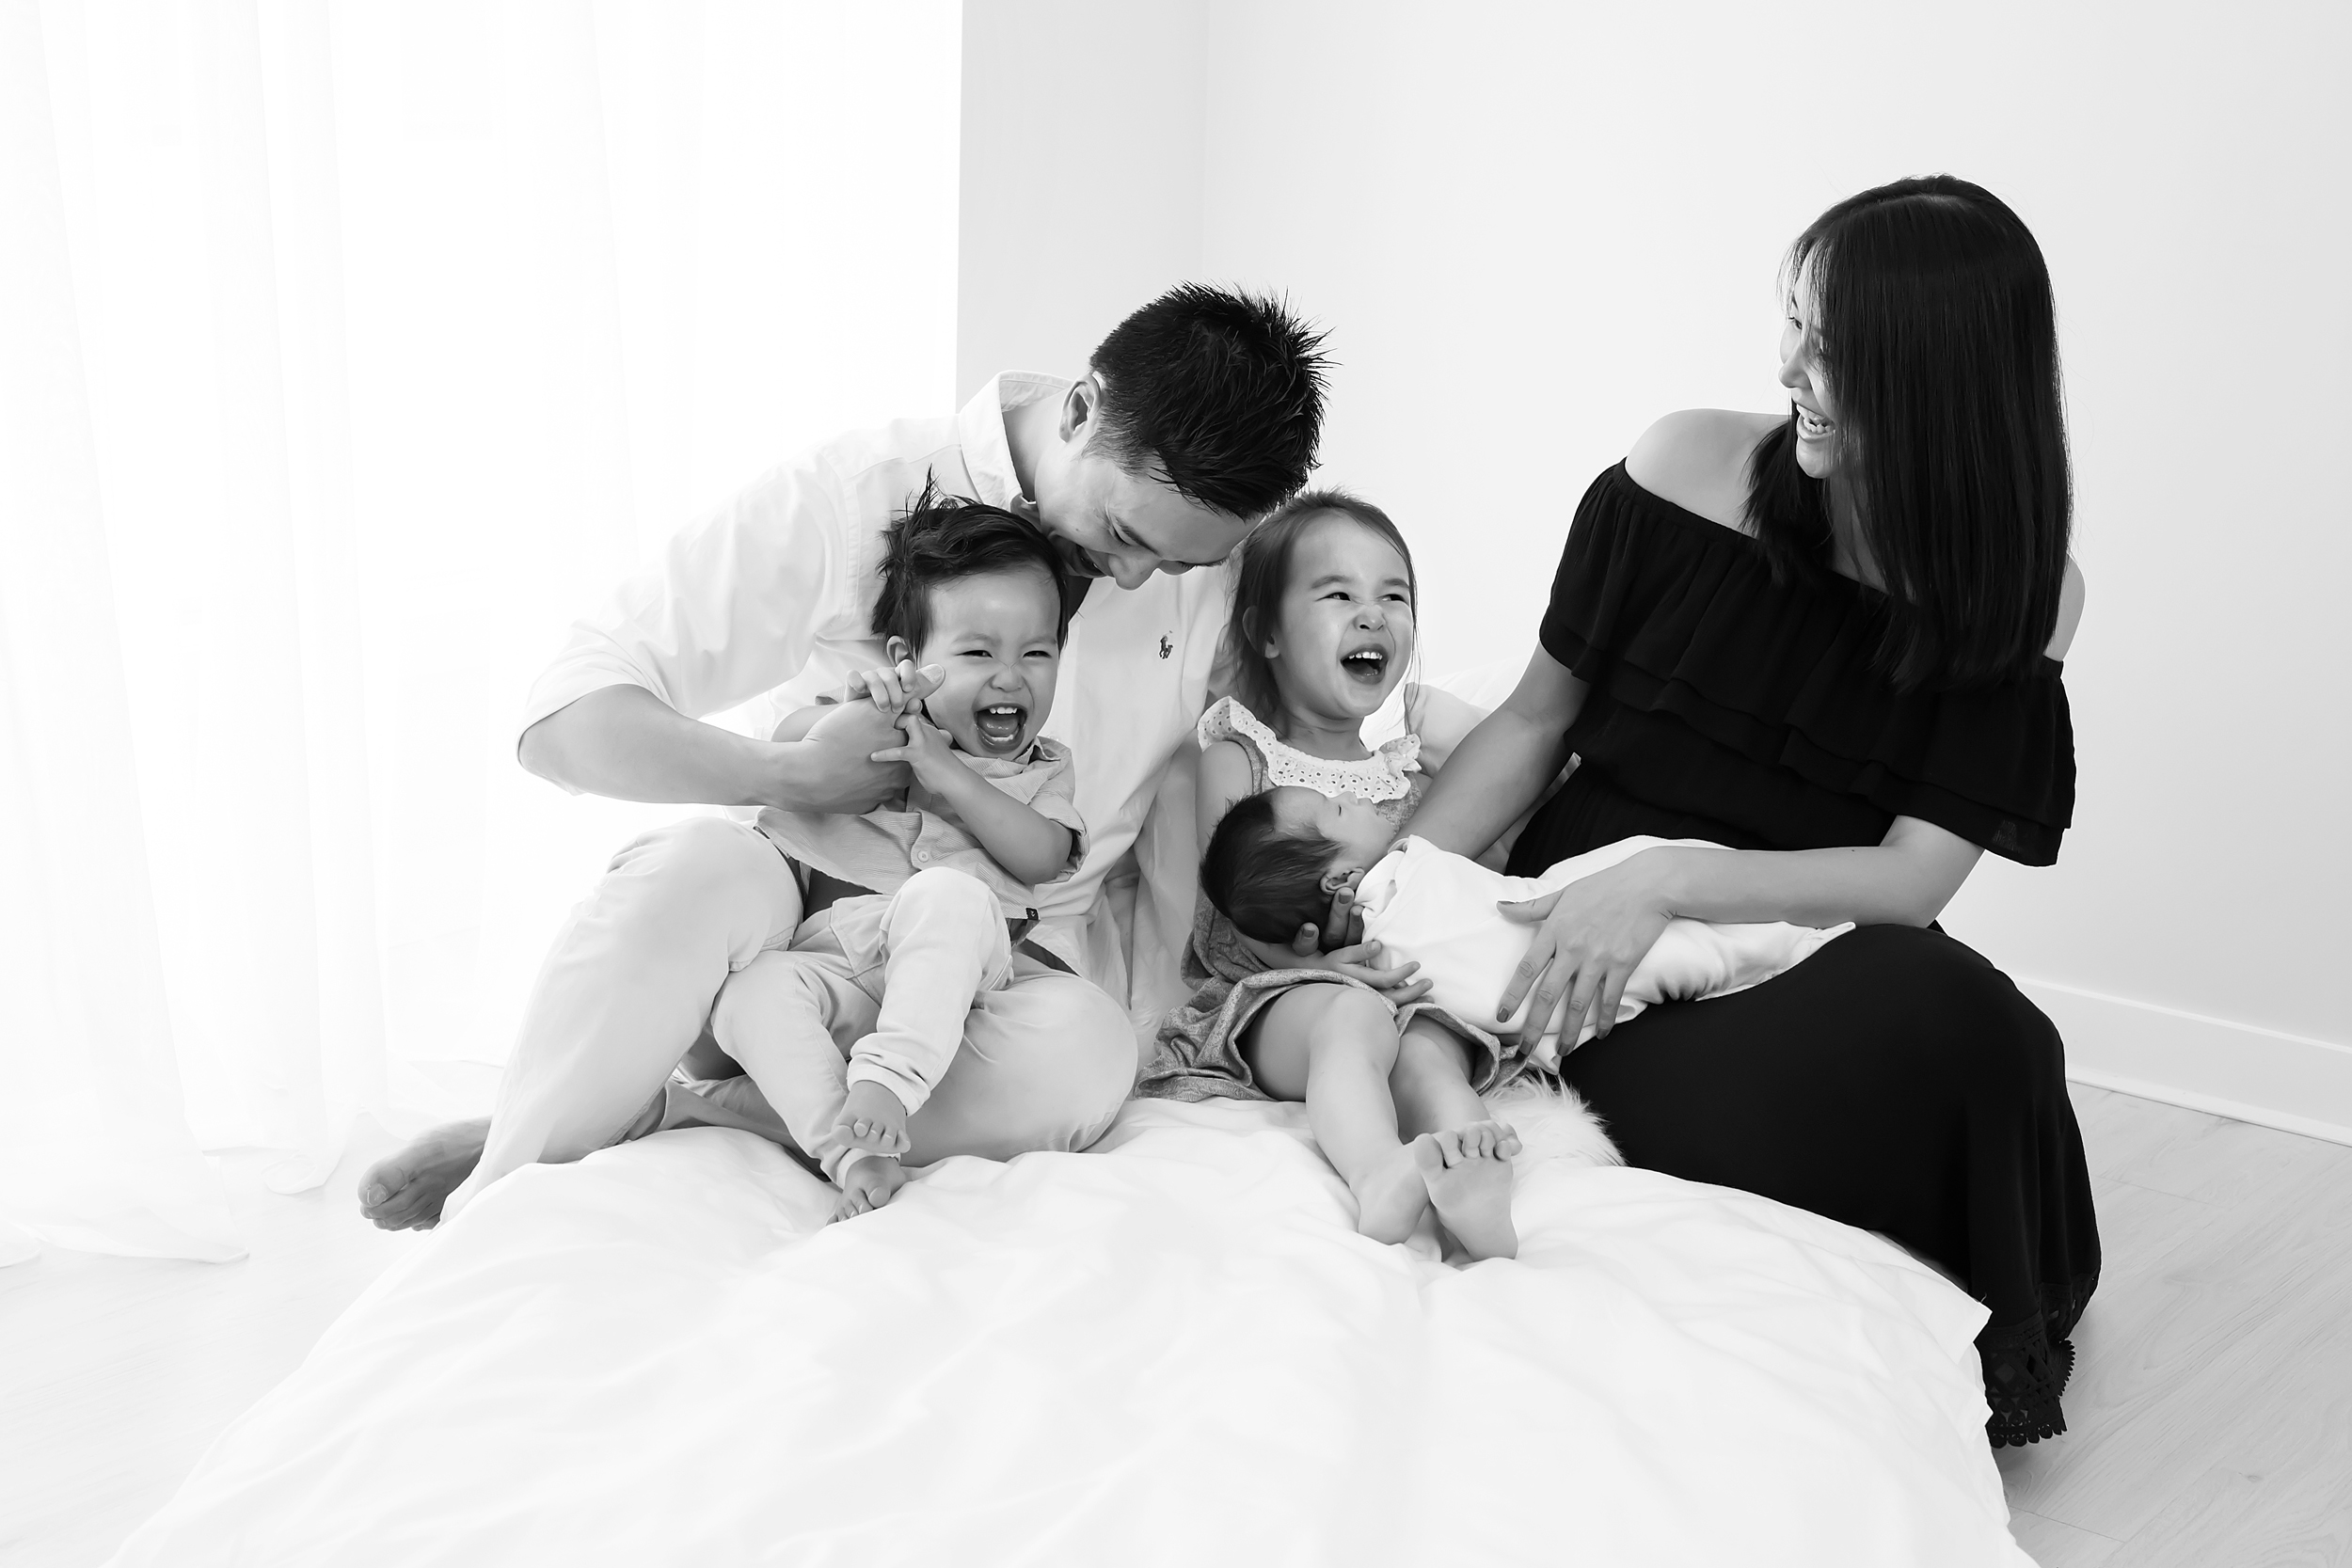 A candid photo of a Melbourne family with their newborn baby taken by Melbourne newborn photographer, Monique Graham